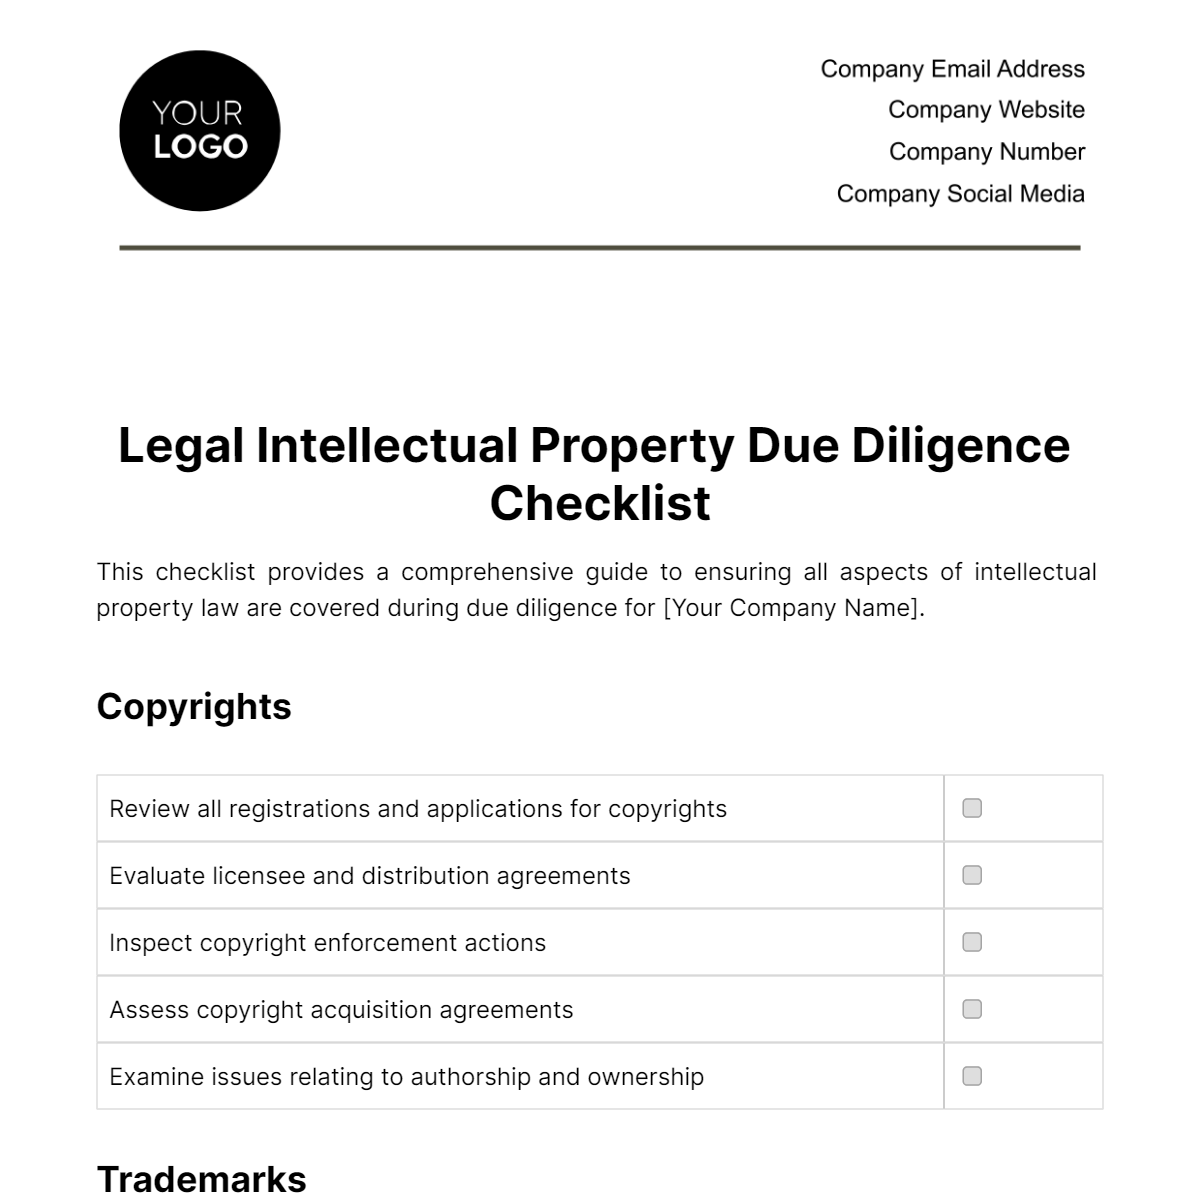 Free Legal Intellectual Property Due Diligence Checklist Template